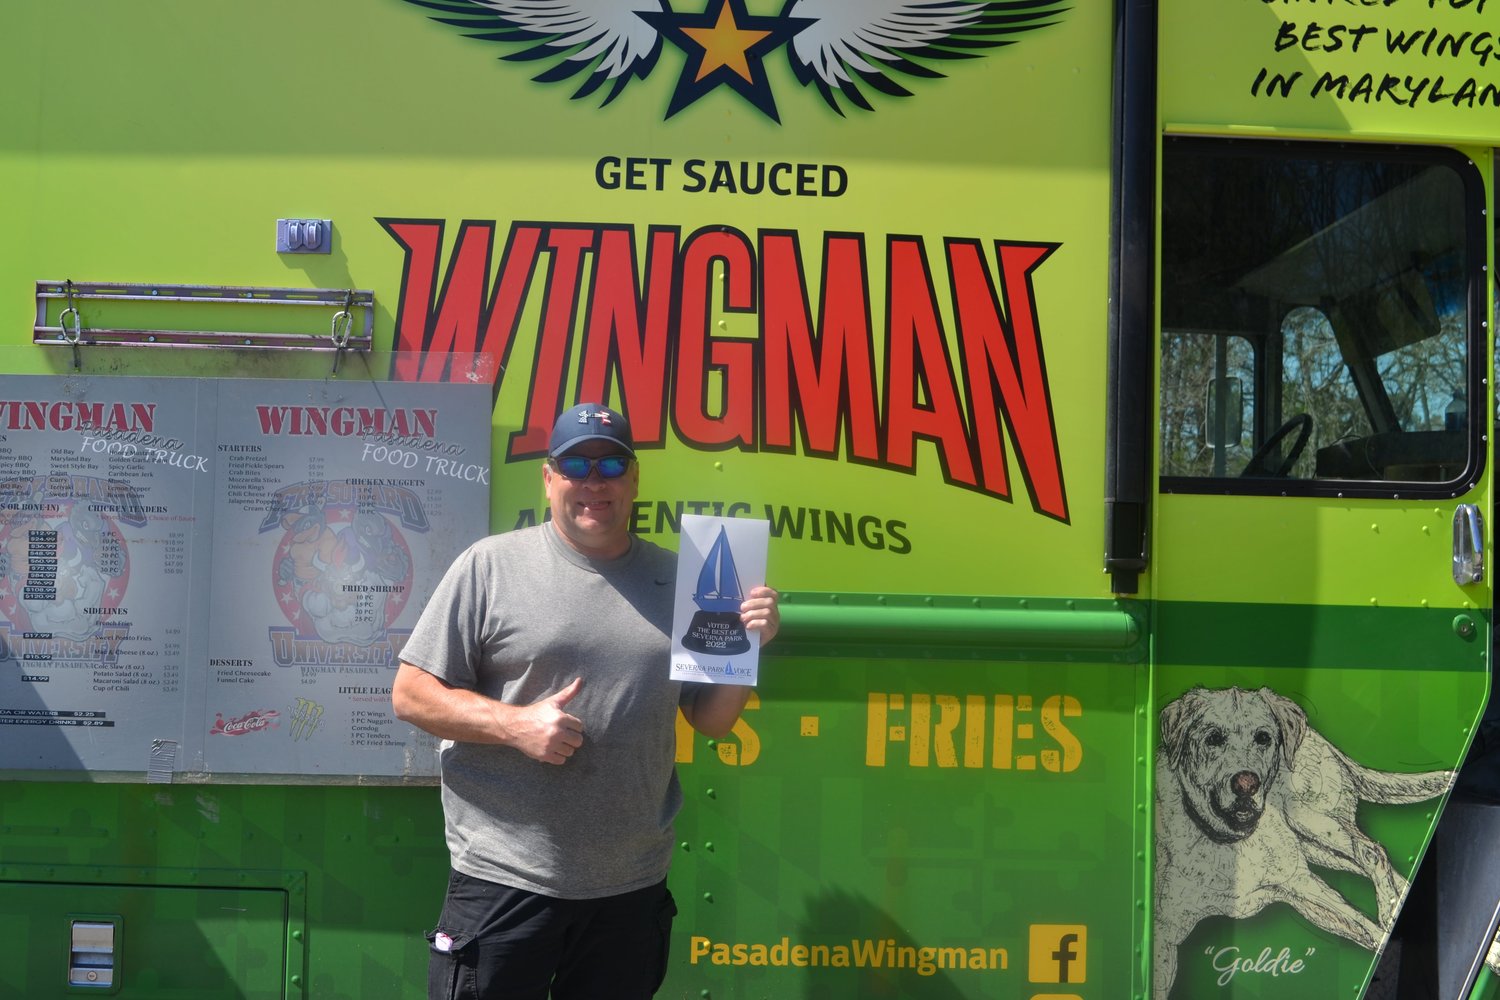 Wingman received the award for Best Food Truck.